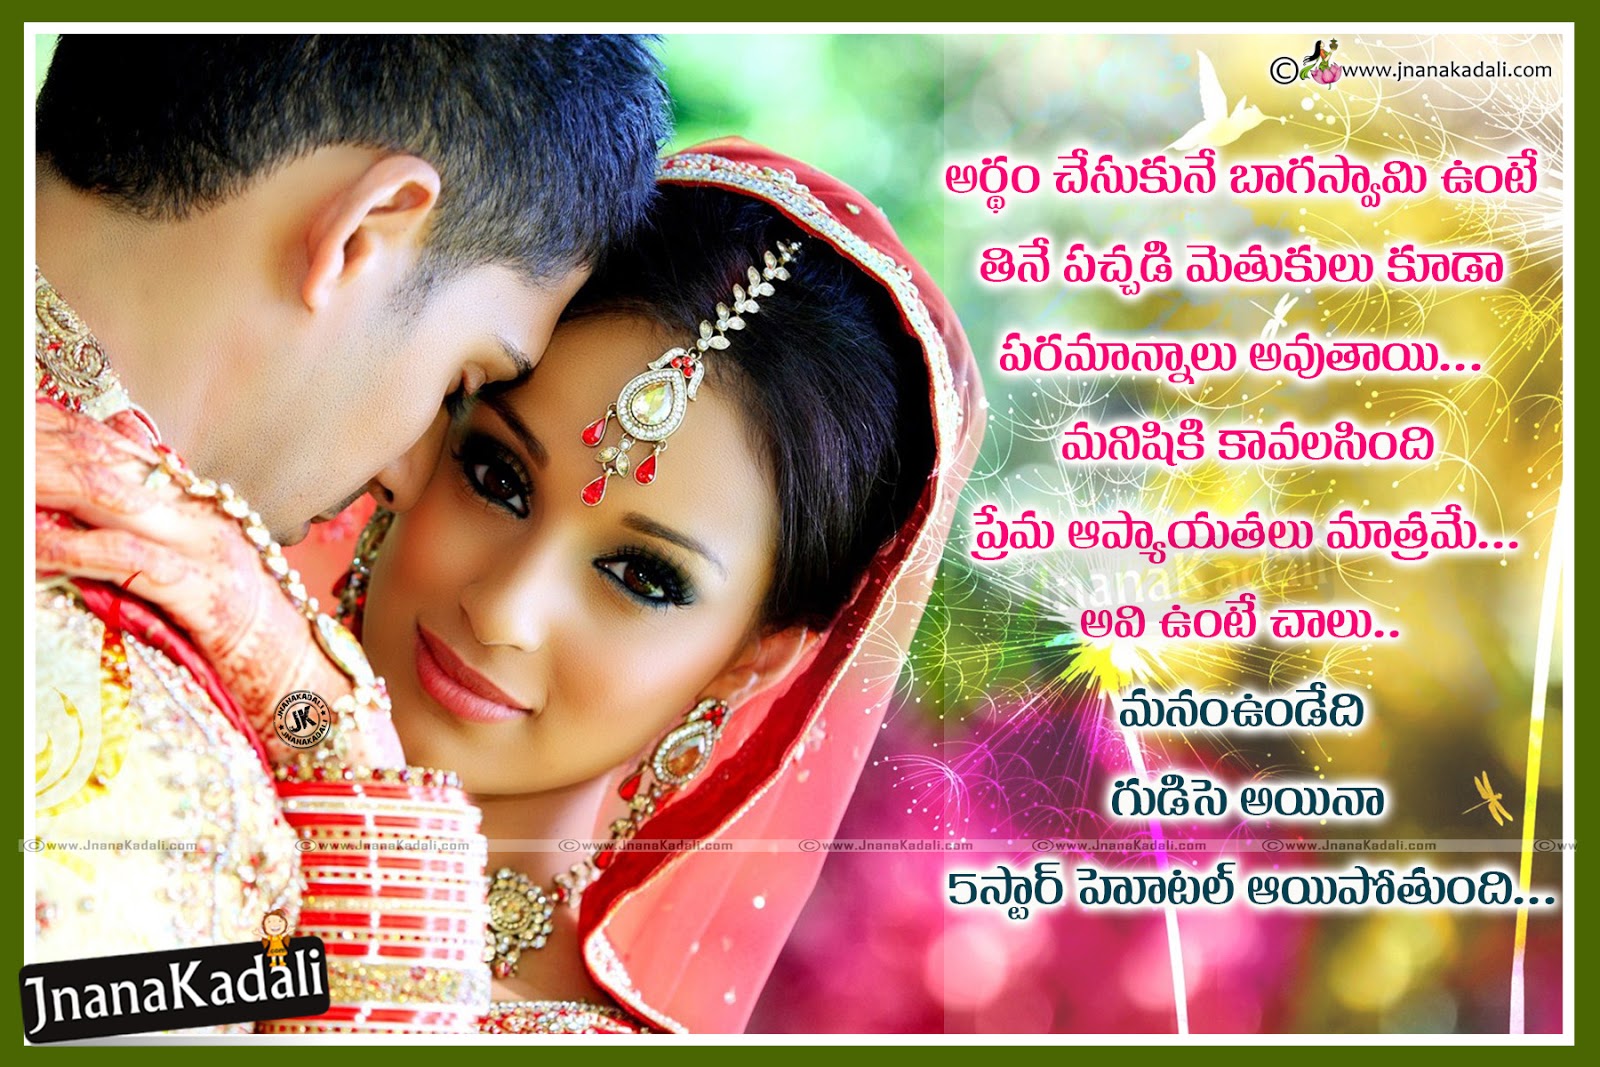 Telugu Best Wife and Husband QuotesRelationship Quotes in